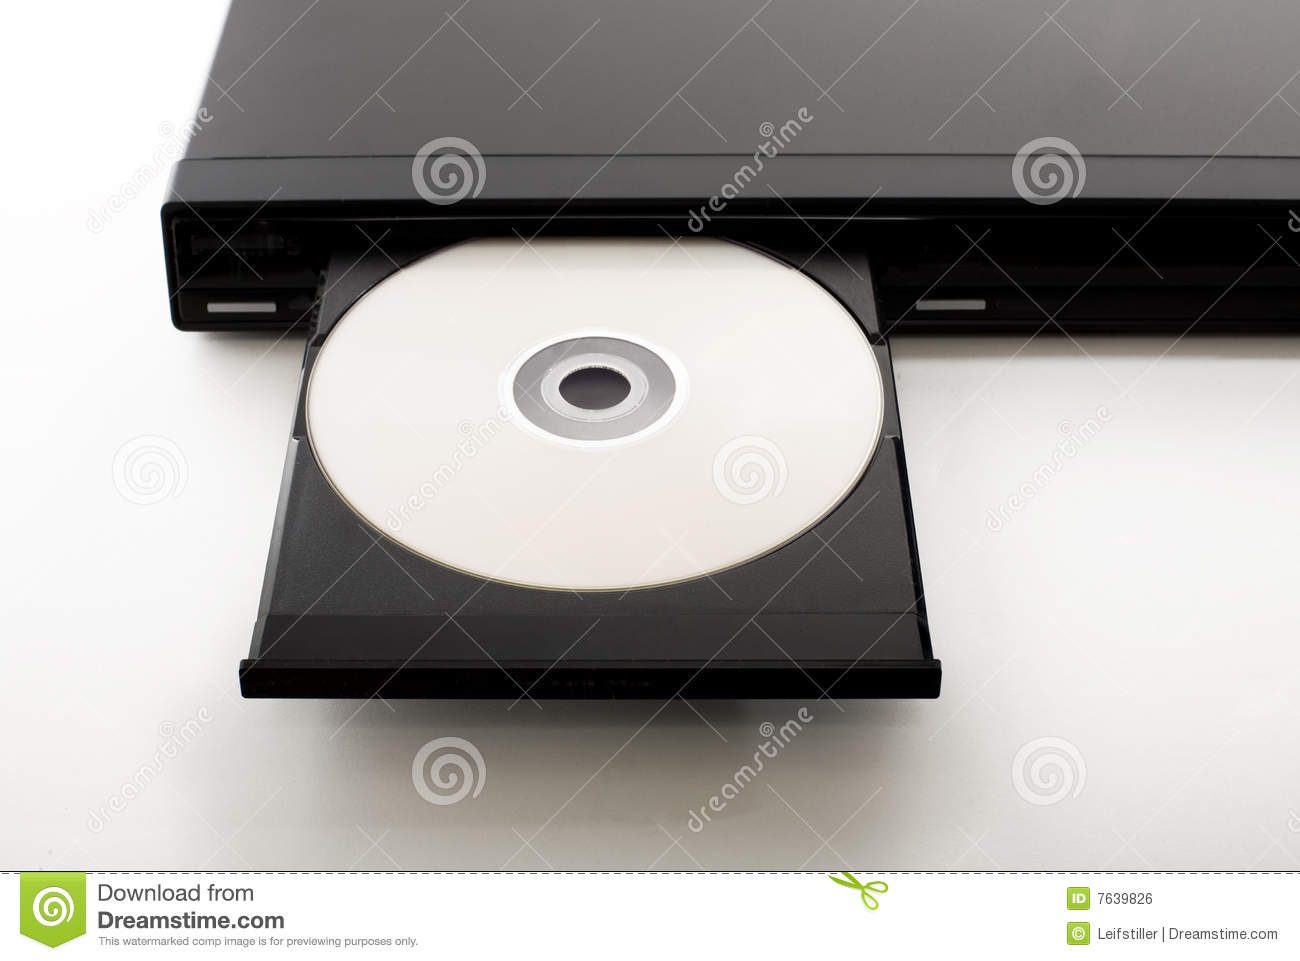 power dvd player free download